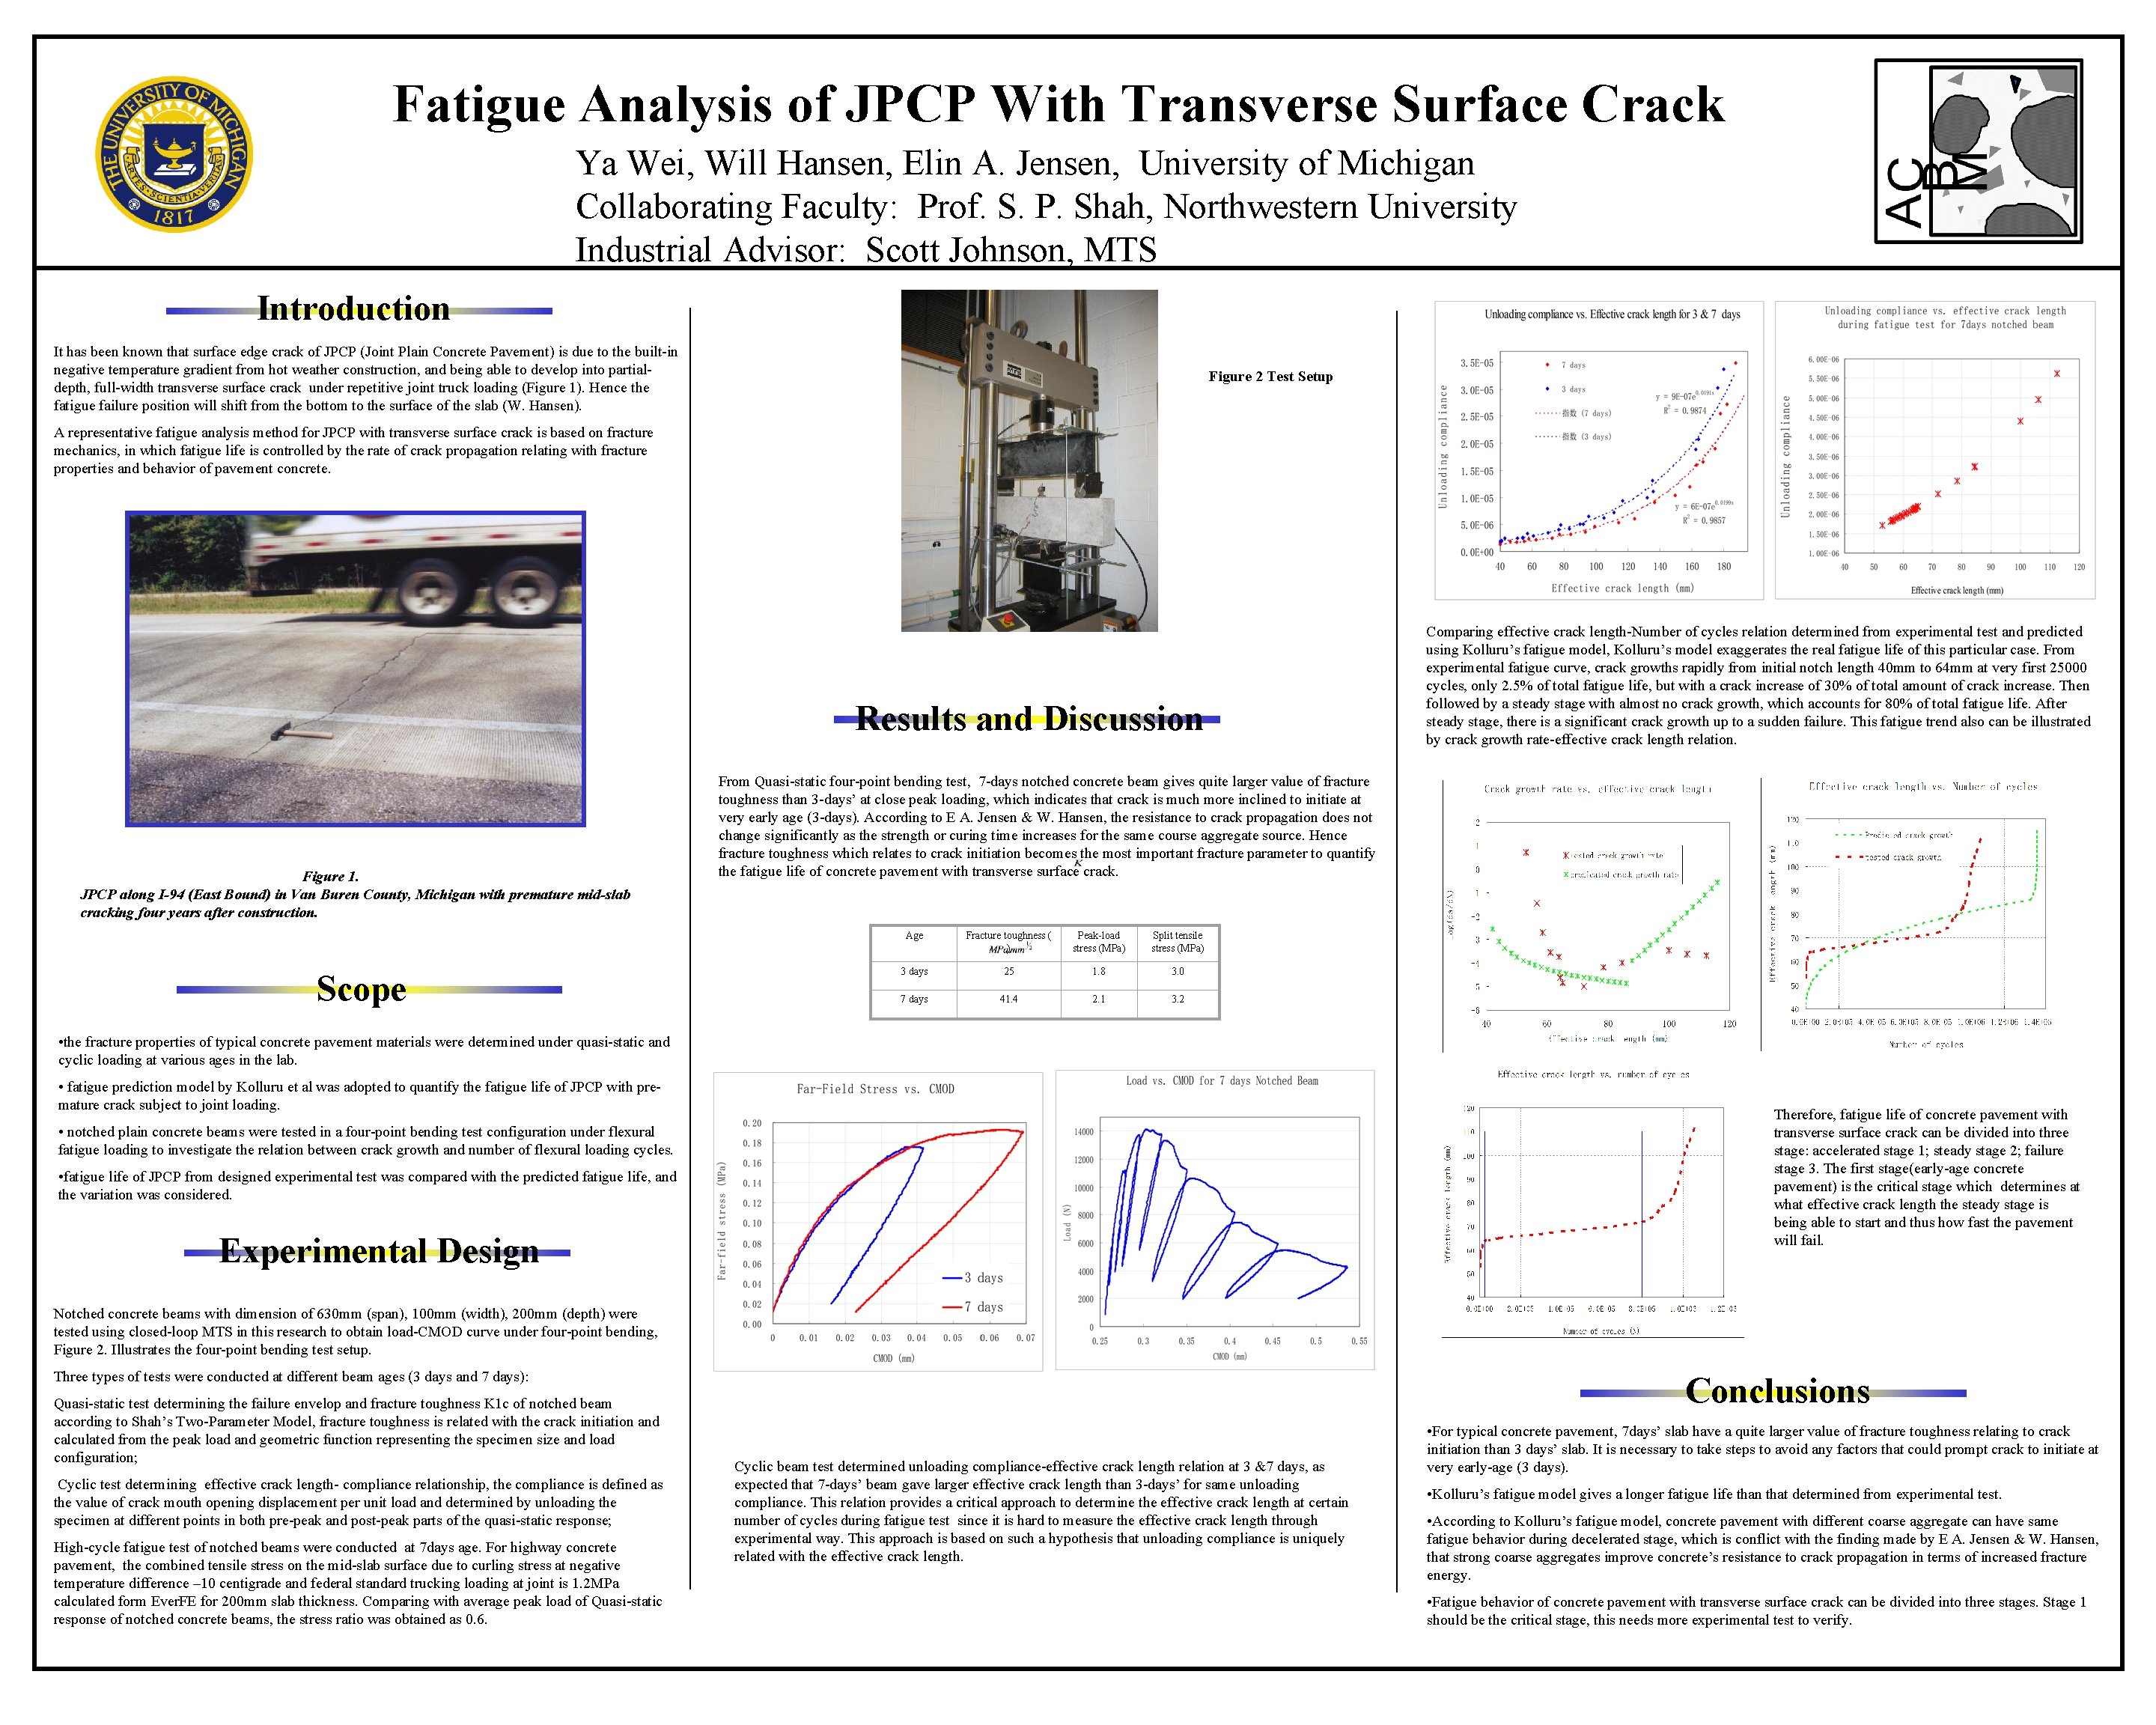 Fatigue Analysis of JPCP With Transverse Surface Crack Ya Wei, Will Hansen, Elin A.